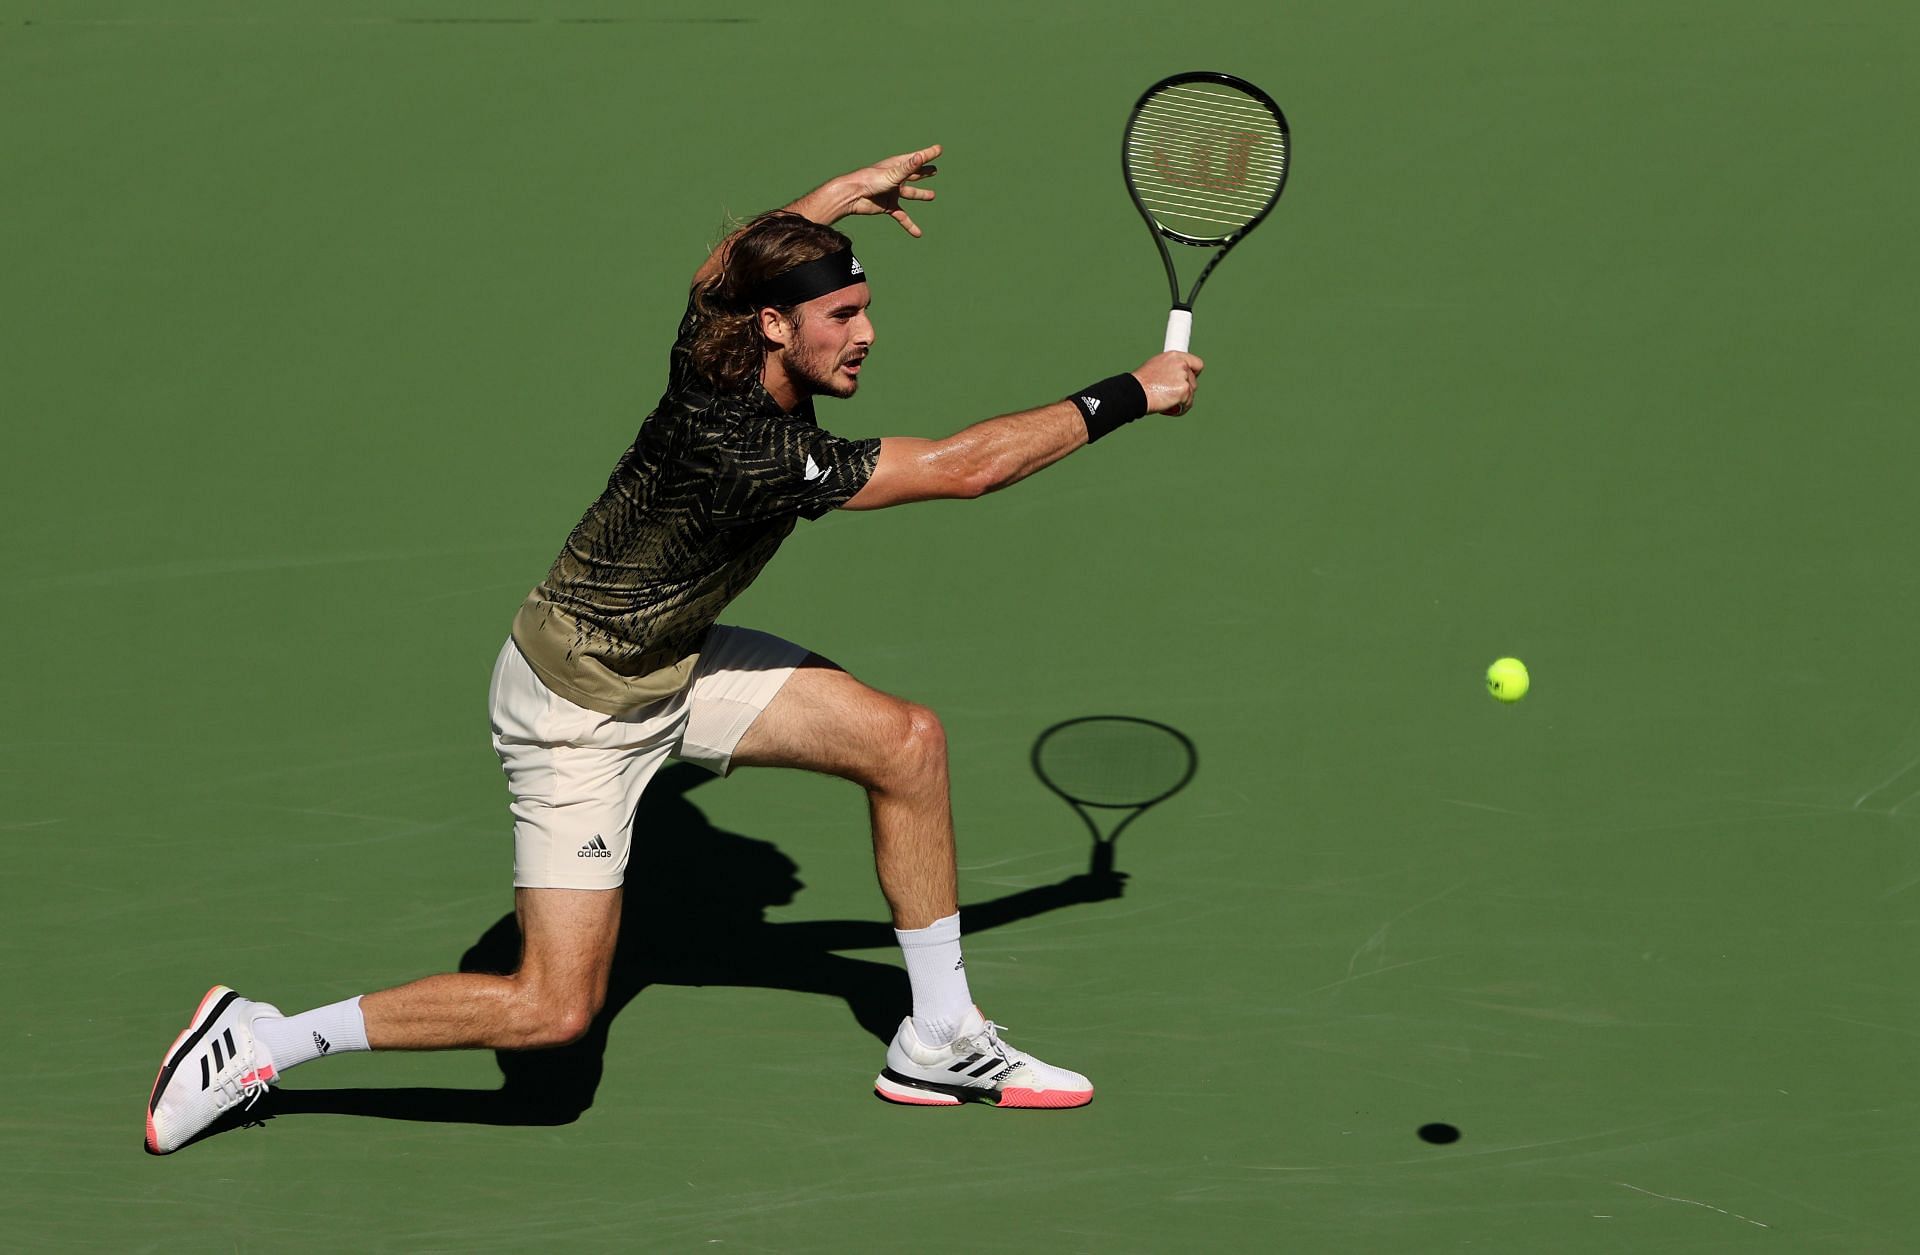 Stefanos Tsitsipas in action at the BNP Paribas Open in Indian Wells